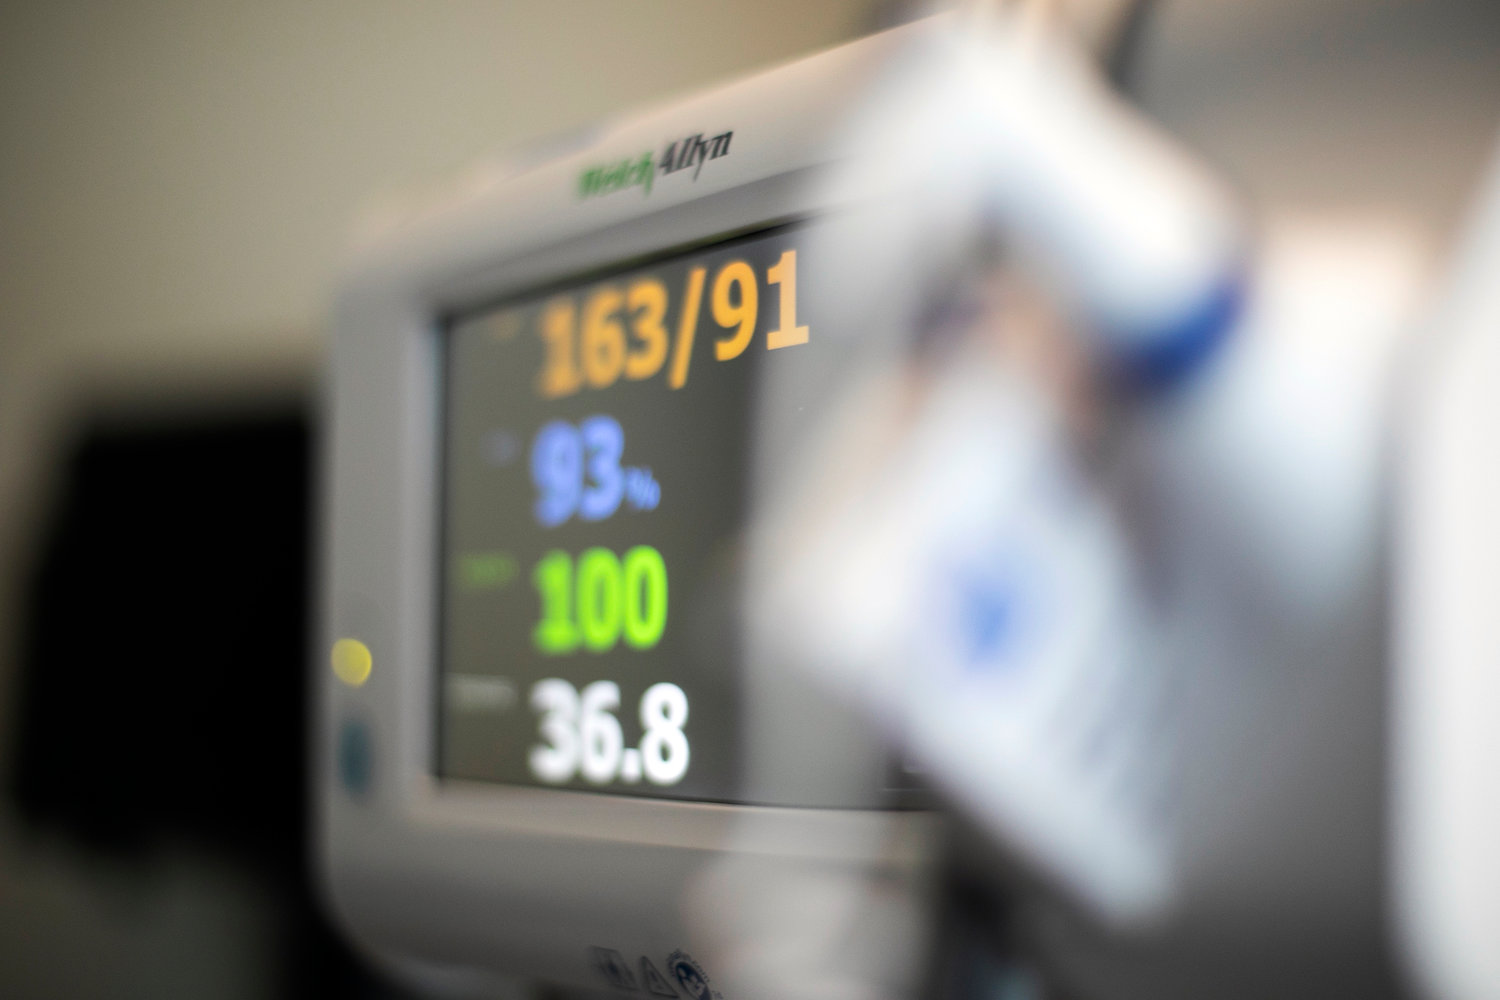 FILE - In this Aug. 8, 2020, photo a patient's vital signs are displayed on a monitor at a hospital in Portland, Ore. At its current pace, Medicare‚Äôs Hospital Insurance trust fund will run out of money in 2028, according to the latest Medicare trustees report. That‚Äôs a two-year extension on the previous estimate. (AP Photo/Jenny Kane, File)